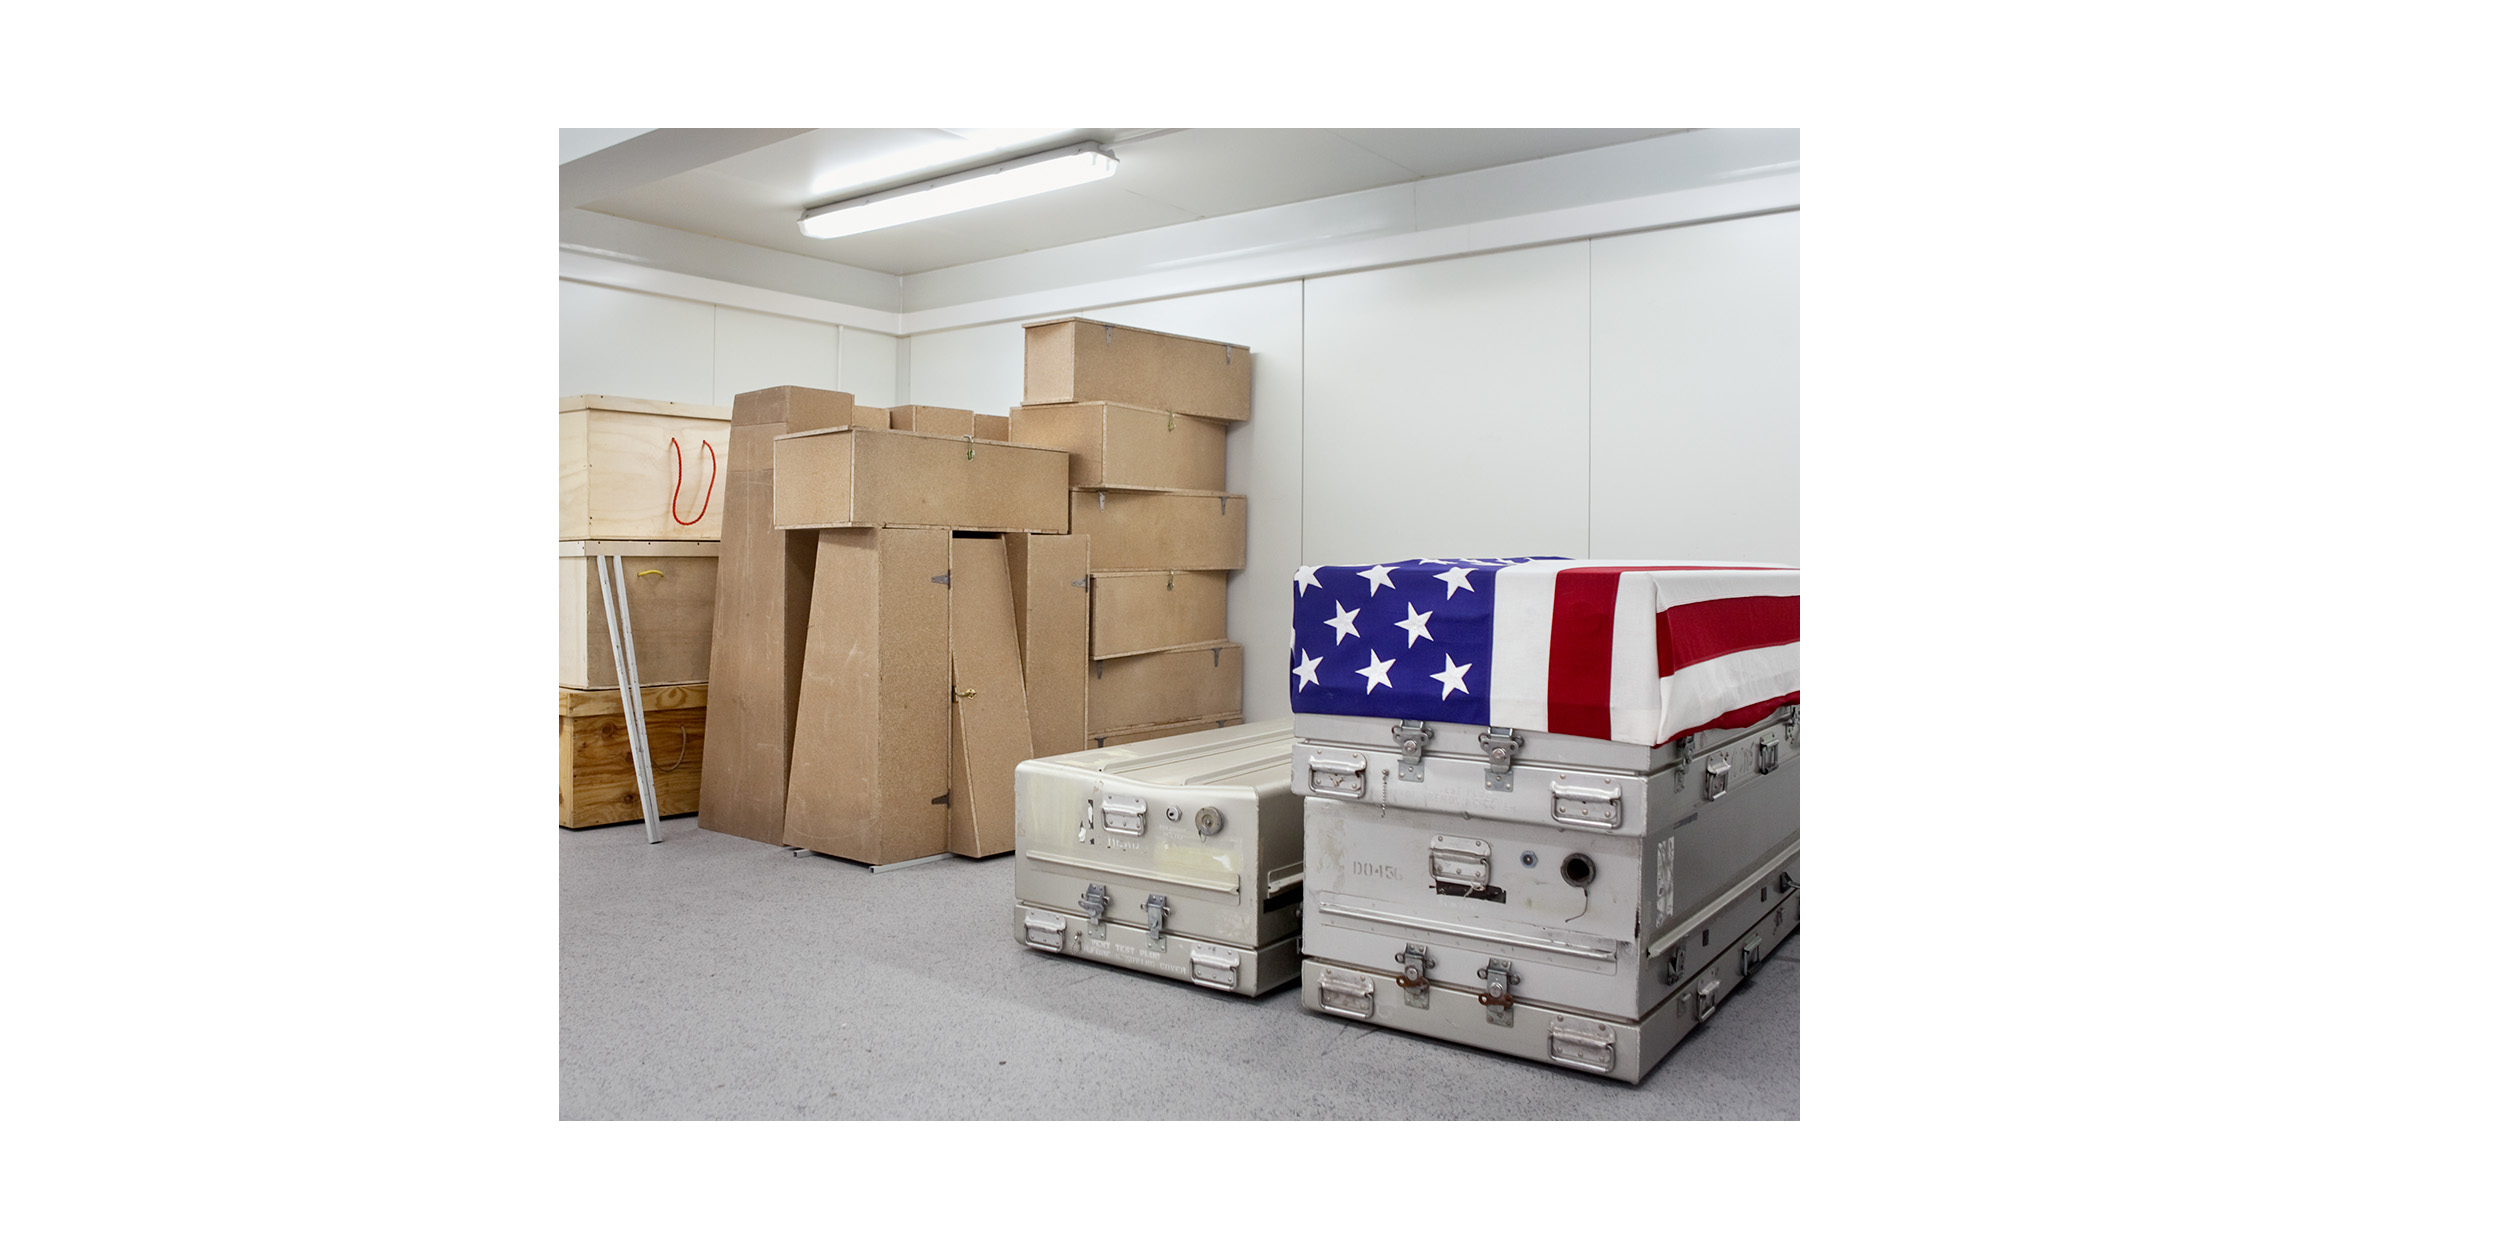  Stacked in a small room at the Mortuary Affairs Collection point in Kandahar Airfield are the transfer cases for civilian adults (left), &nbsp;children (centre) and US soldiers (right).&nbsp;During a 24-hour span, a mortuary affairs team can process